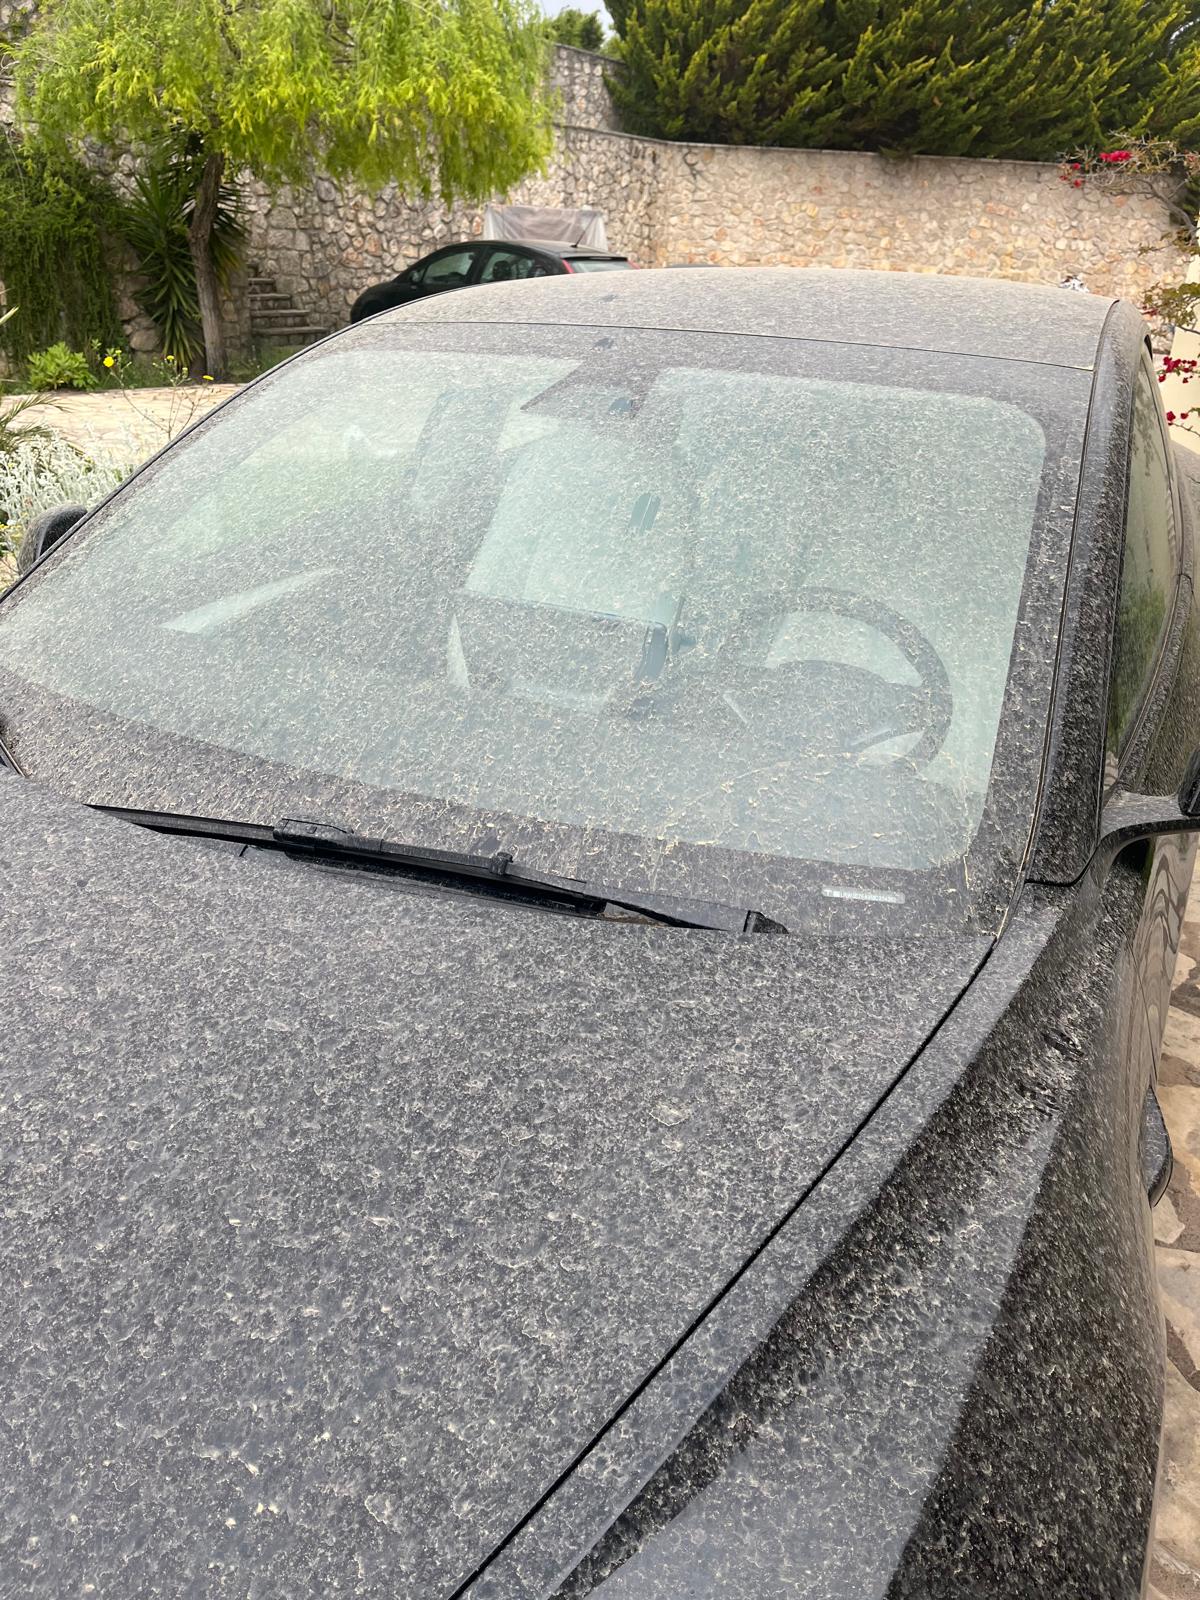 A car covered in orange dust on the Greek island of Lefkada on Tuesday morning